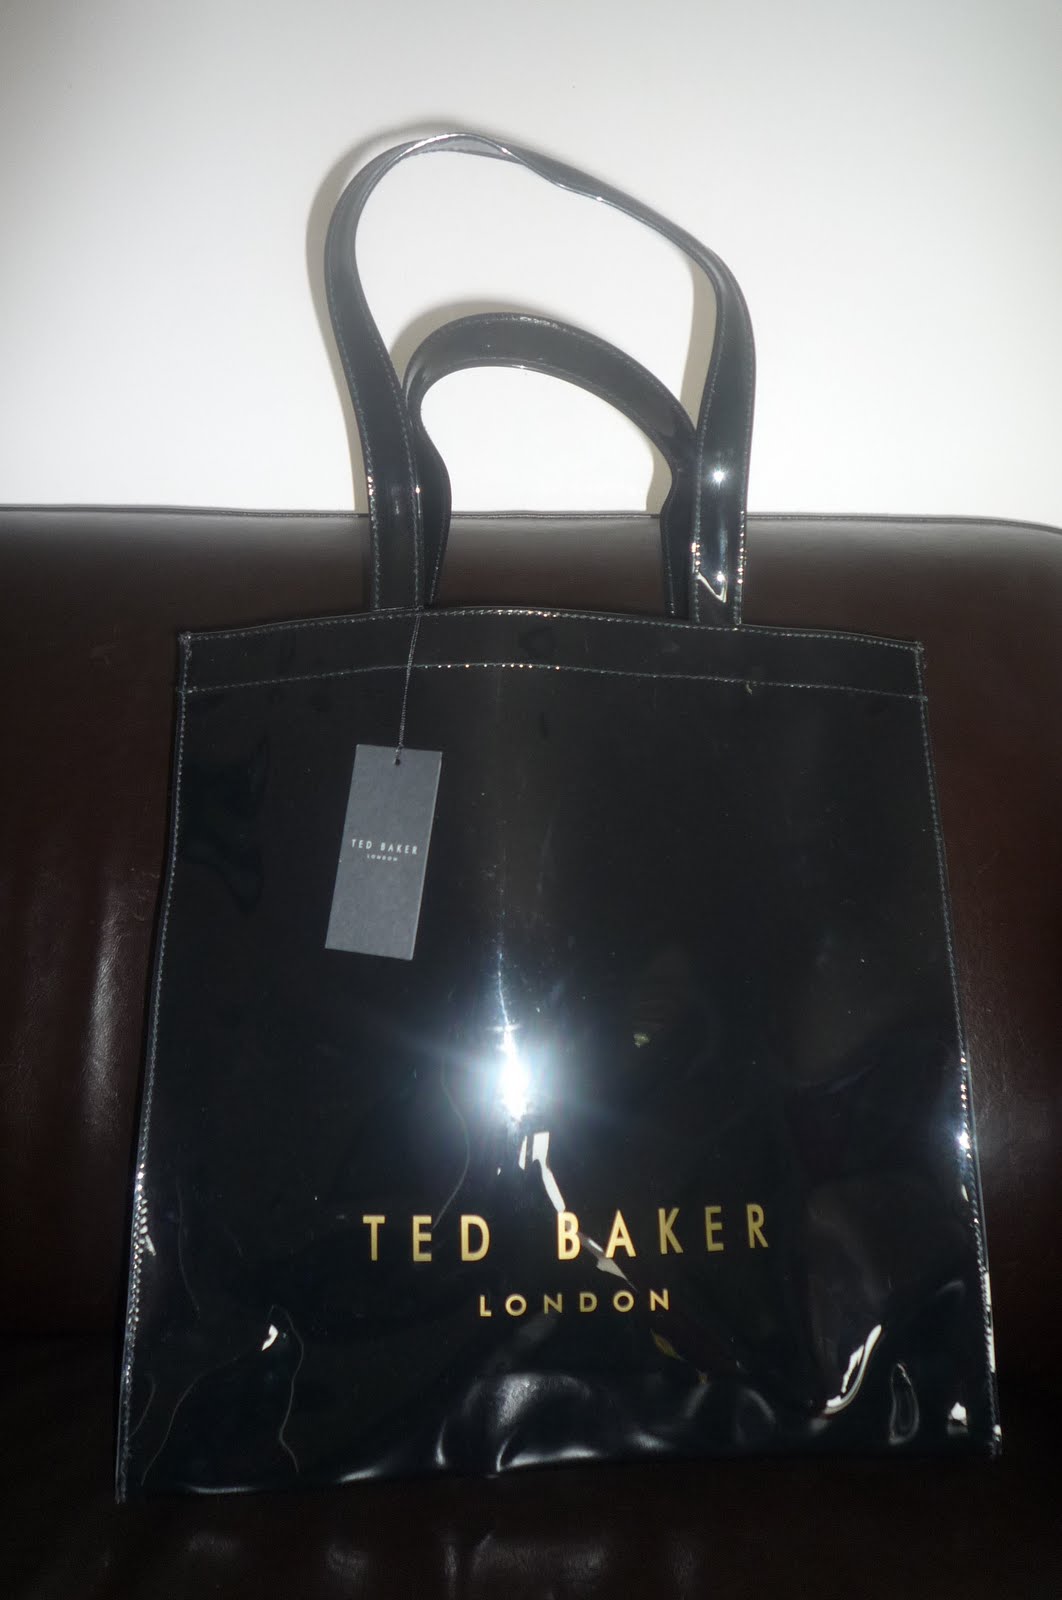 Busybeeroom Welcomes You: LARGE TED VINYL ICONIC SHOPPER BY TED BAKER